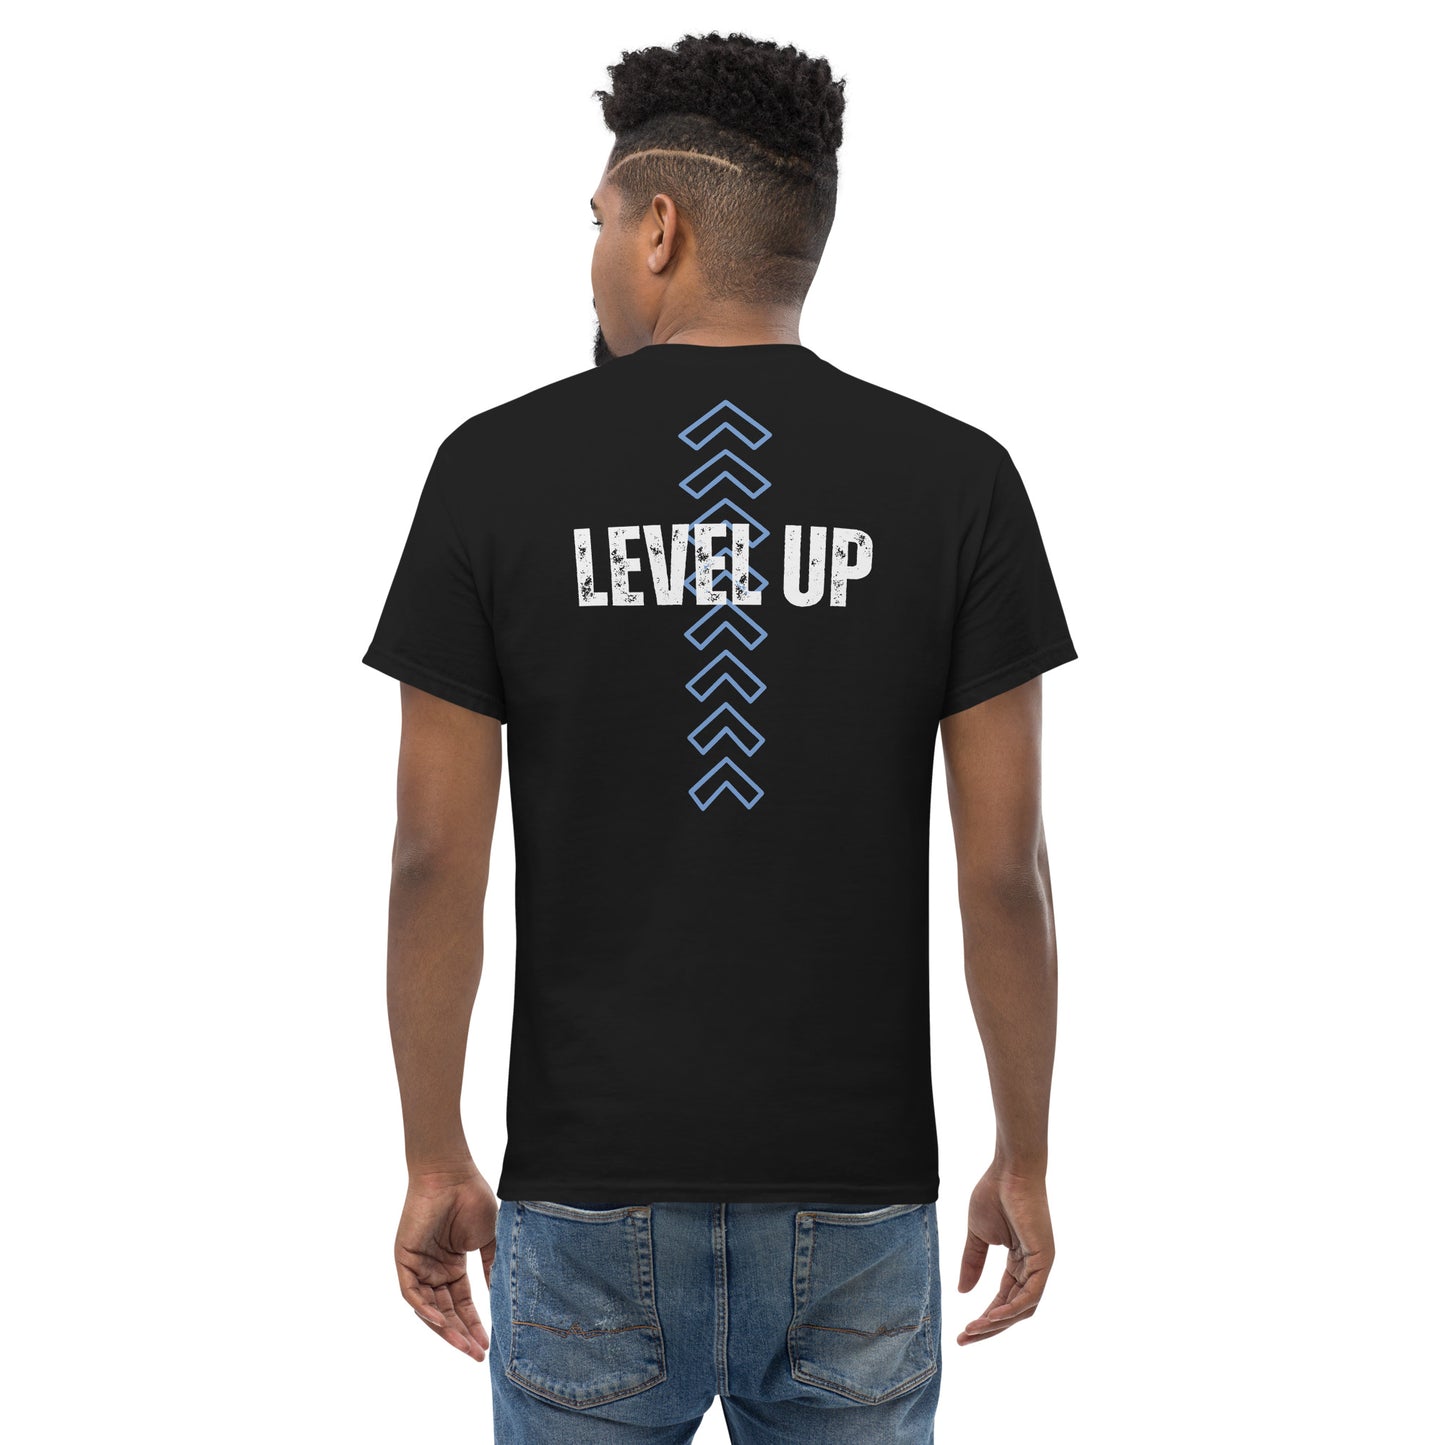 Rise and Level Up: Statement Graphic Men's classic tee